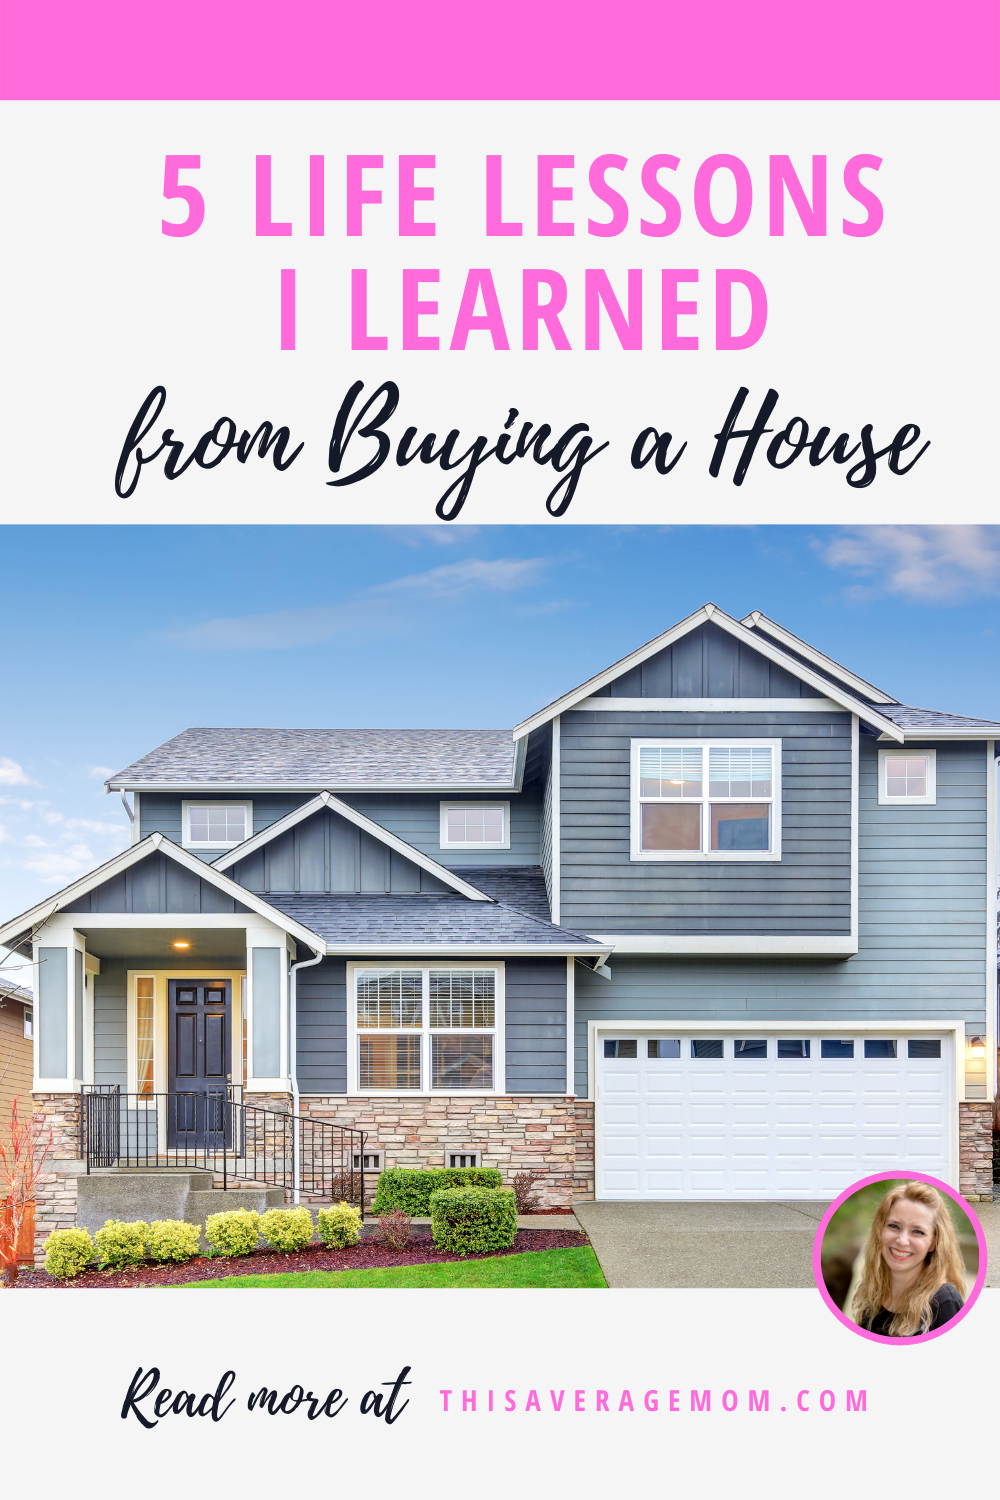 Over the past few months, my family and I have been focused on selling our first house and buying our next home. Weâ€™ve learned so much along the way--and these lessons are not about real estate at all. Iâ€™m sharing some life lessons and reminders Iâ€™ve been blessed to have during this crazy ride. #homebuying #newhouse